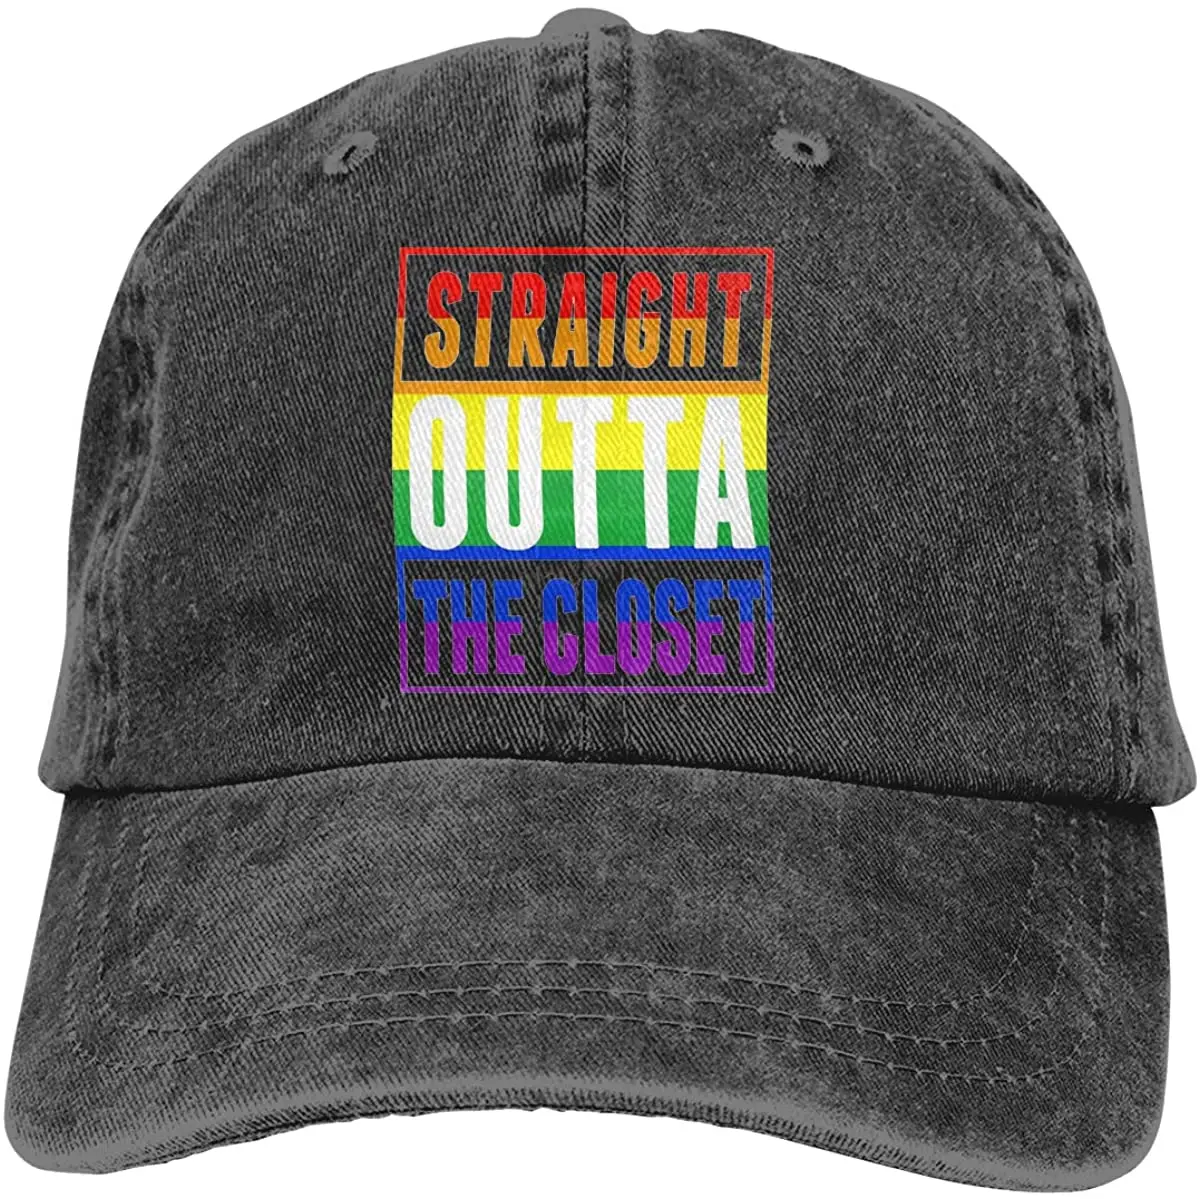 

Straight Outta The Closet Gay And Lesbian Pride Unisex Soft Casquette Cap Vintage Adjustable Baseball Caps